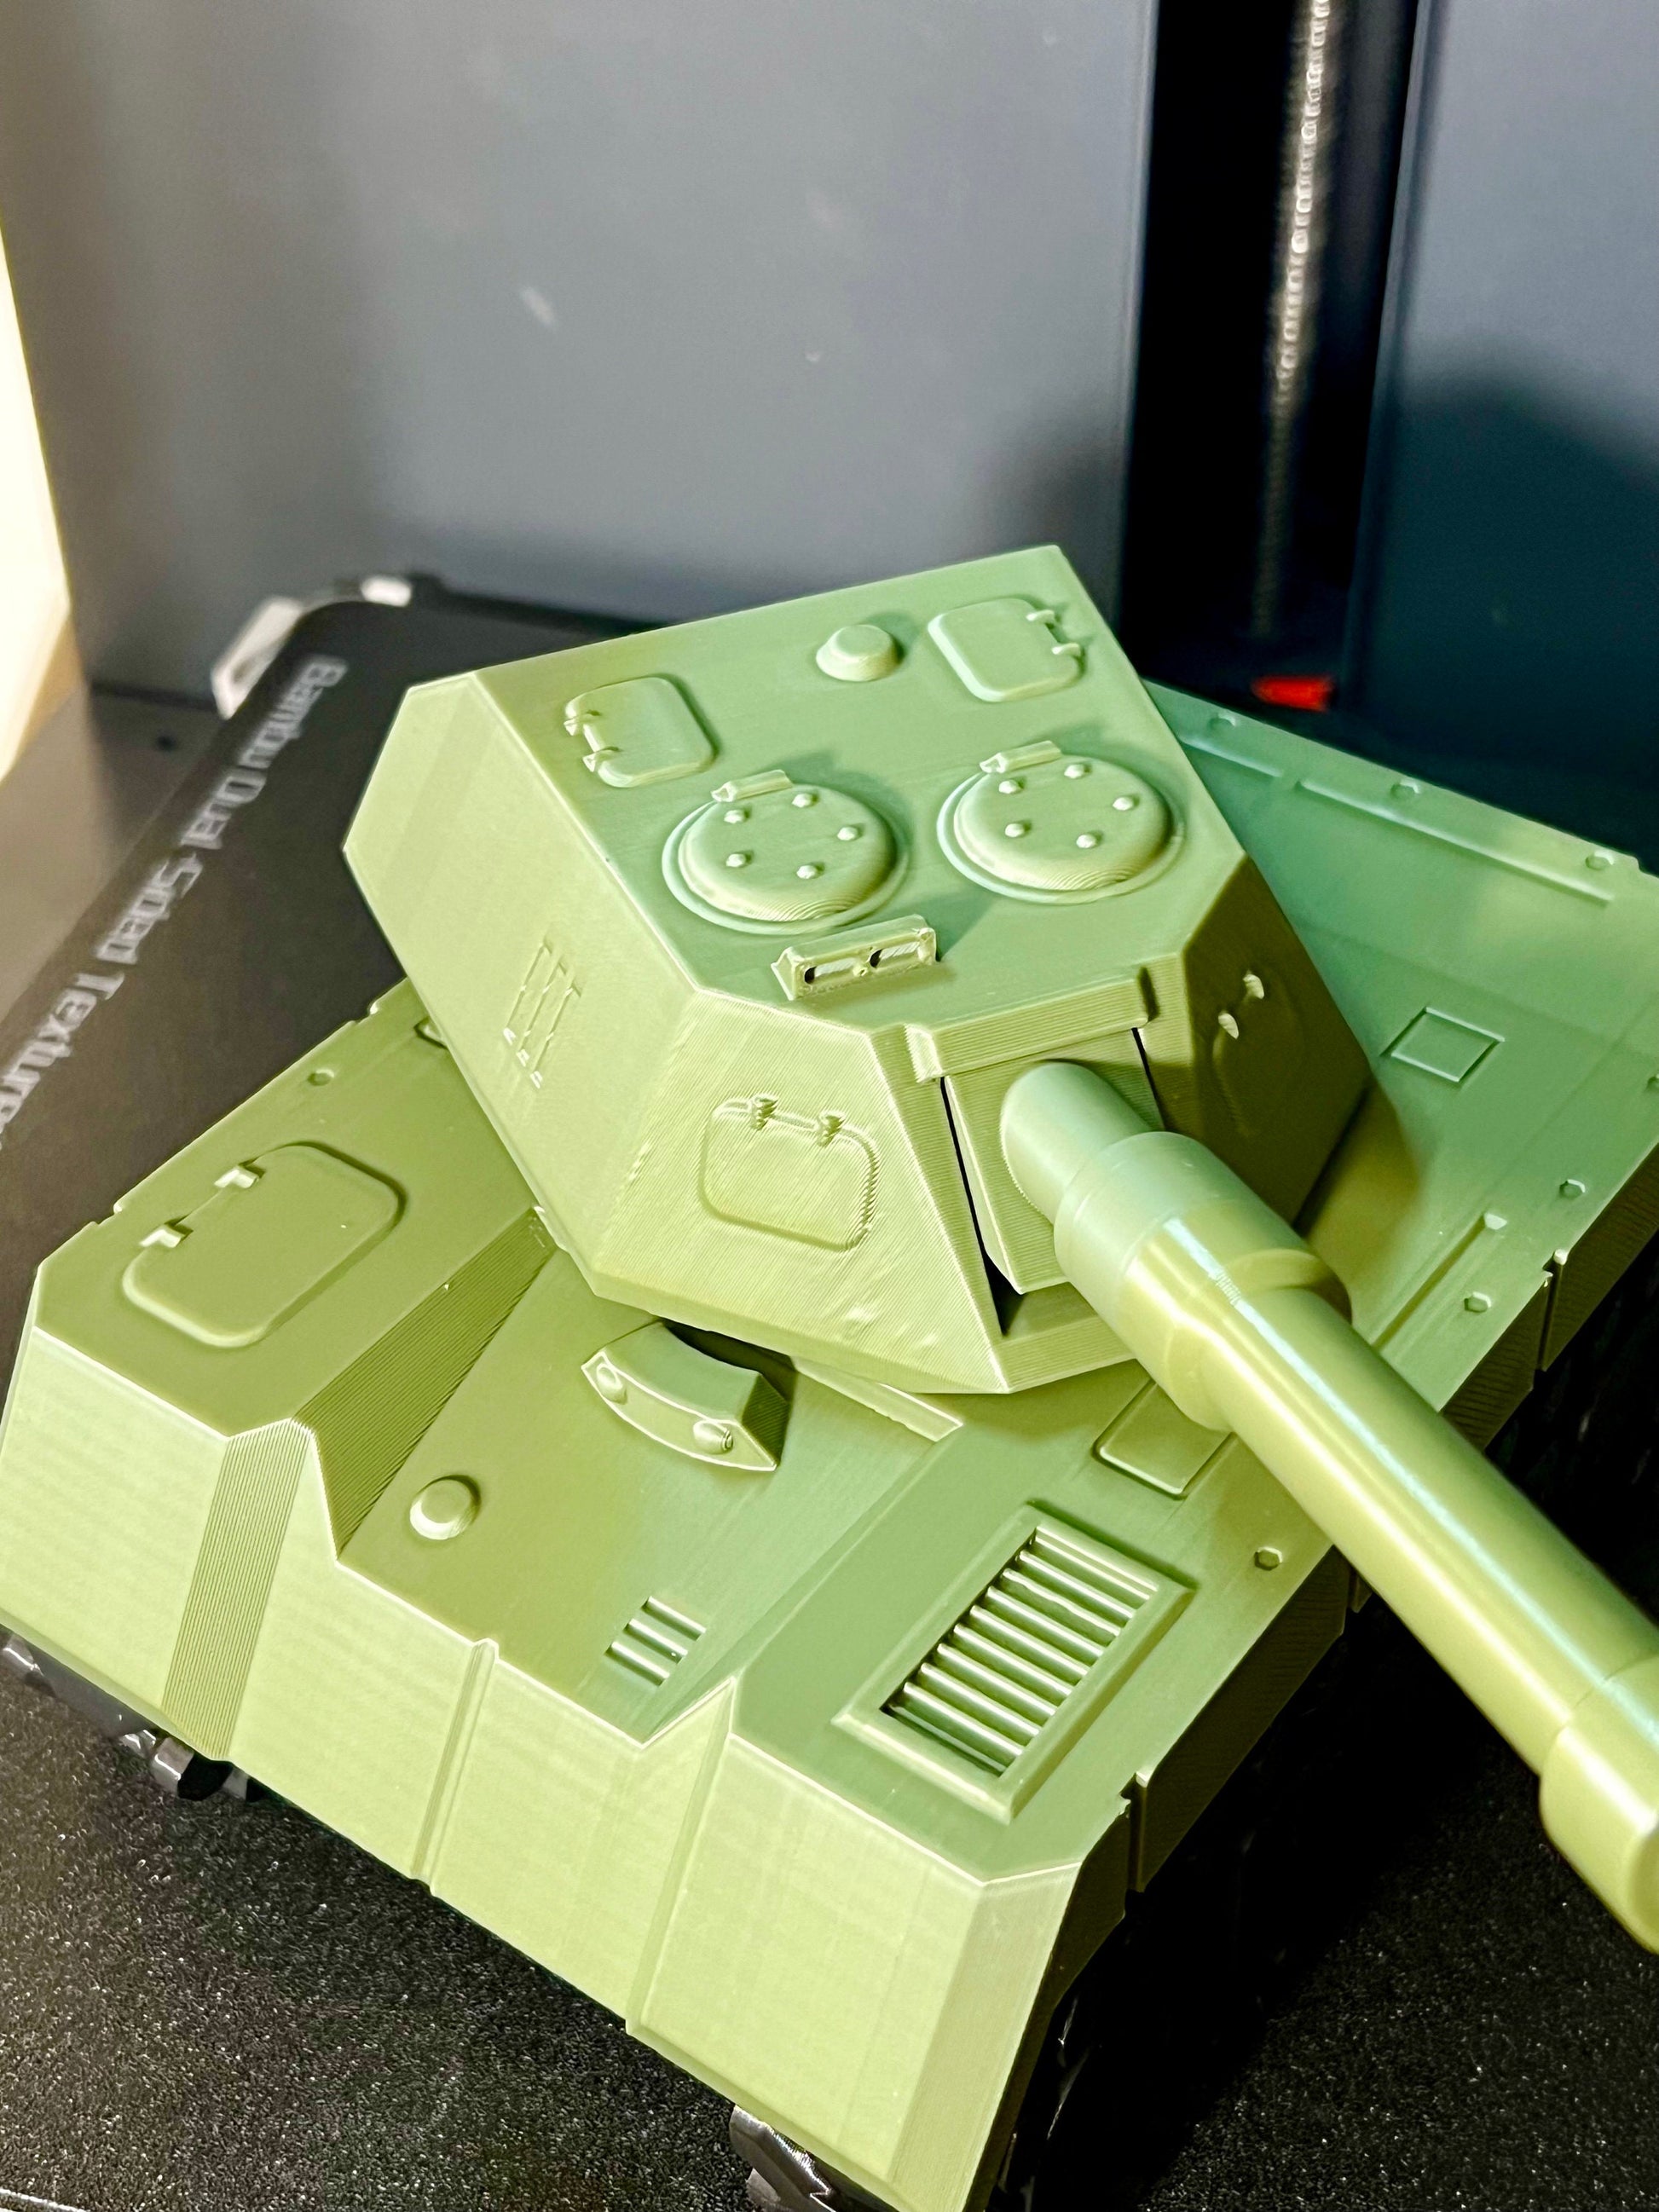 Modular Print-In-Place Tracked Tank Bundle